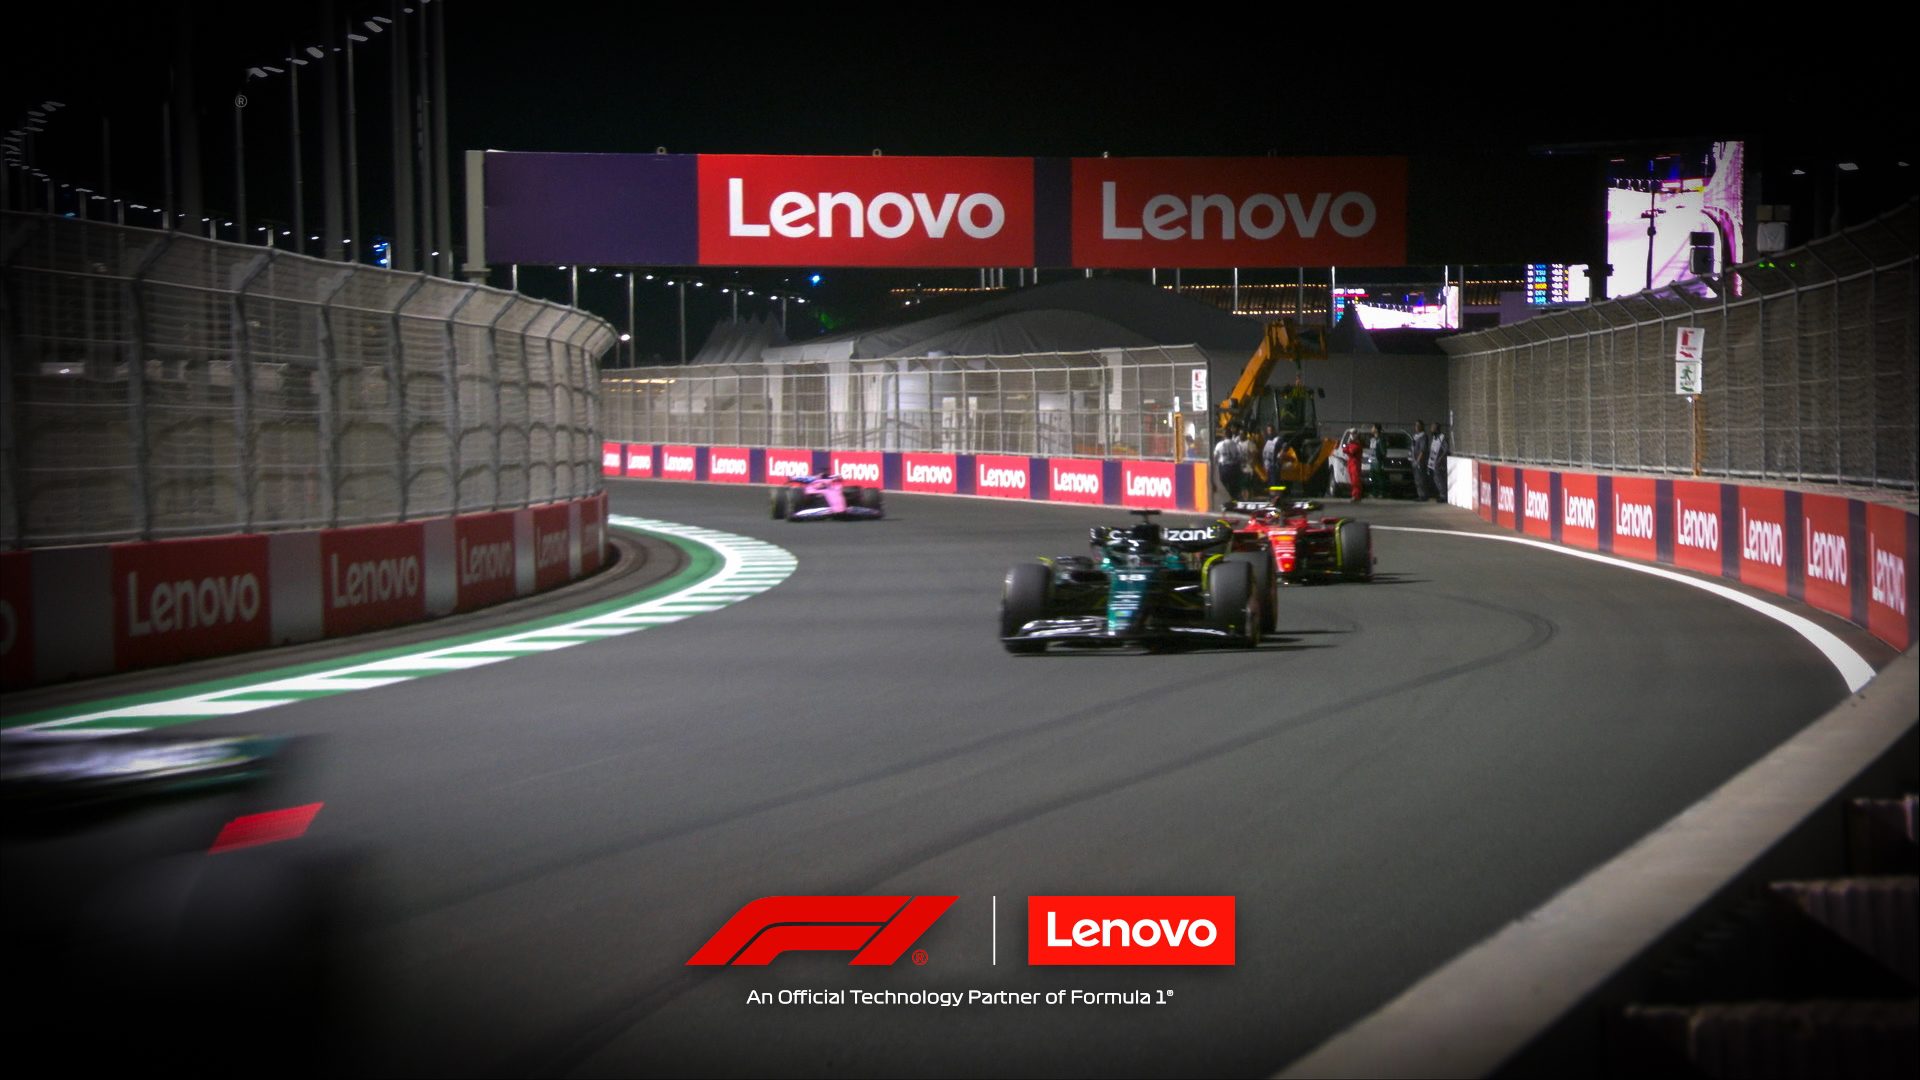 Formula 1® is using Lenovo Technology to build a faster, smarter, and